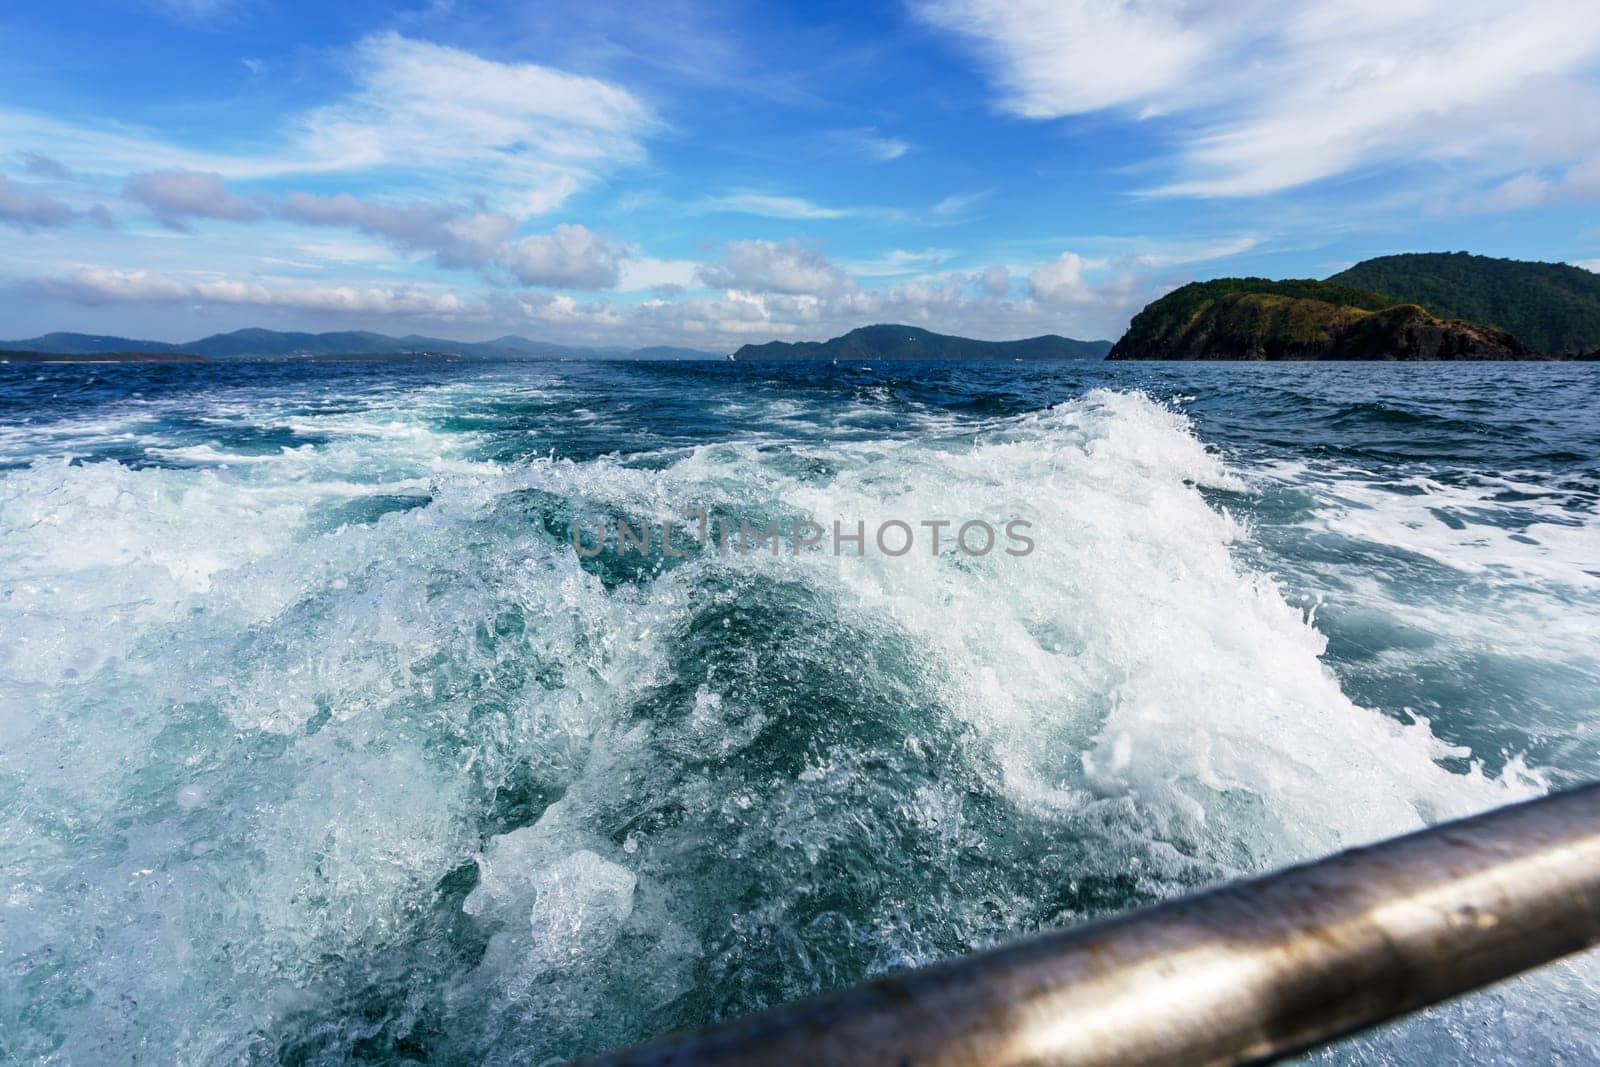 Seascape while boating. Image of sea foam on waves by rivertime